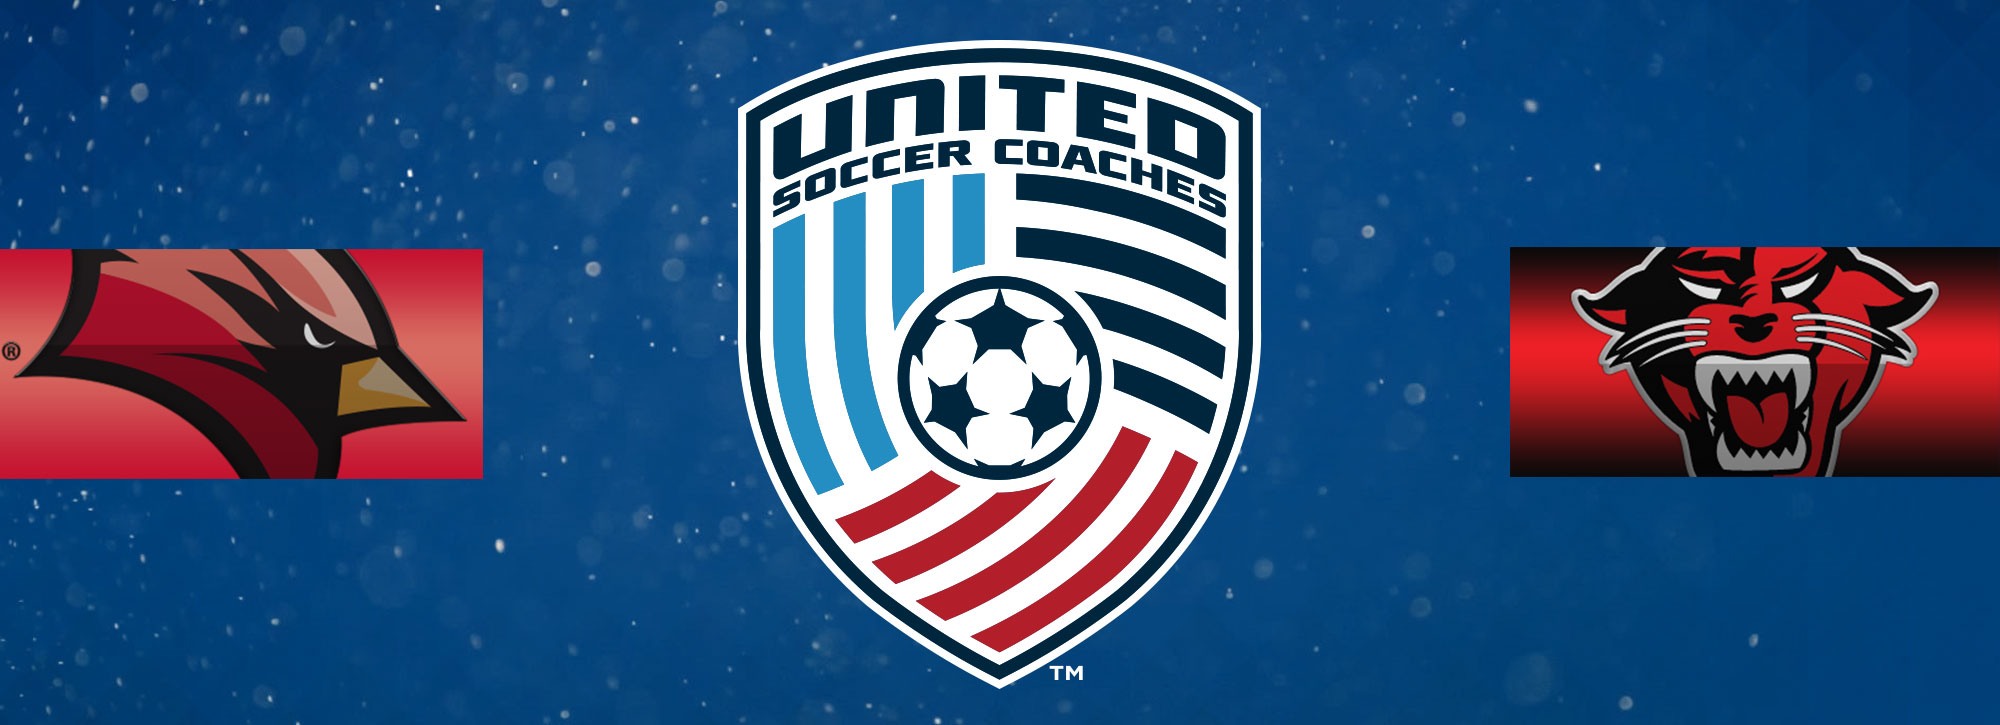 Six Collect United Soccer Coaches Men's All-Midwest Region Honors